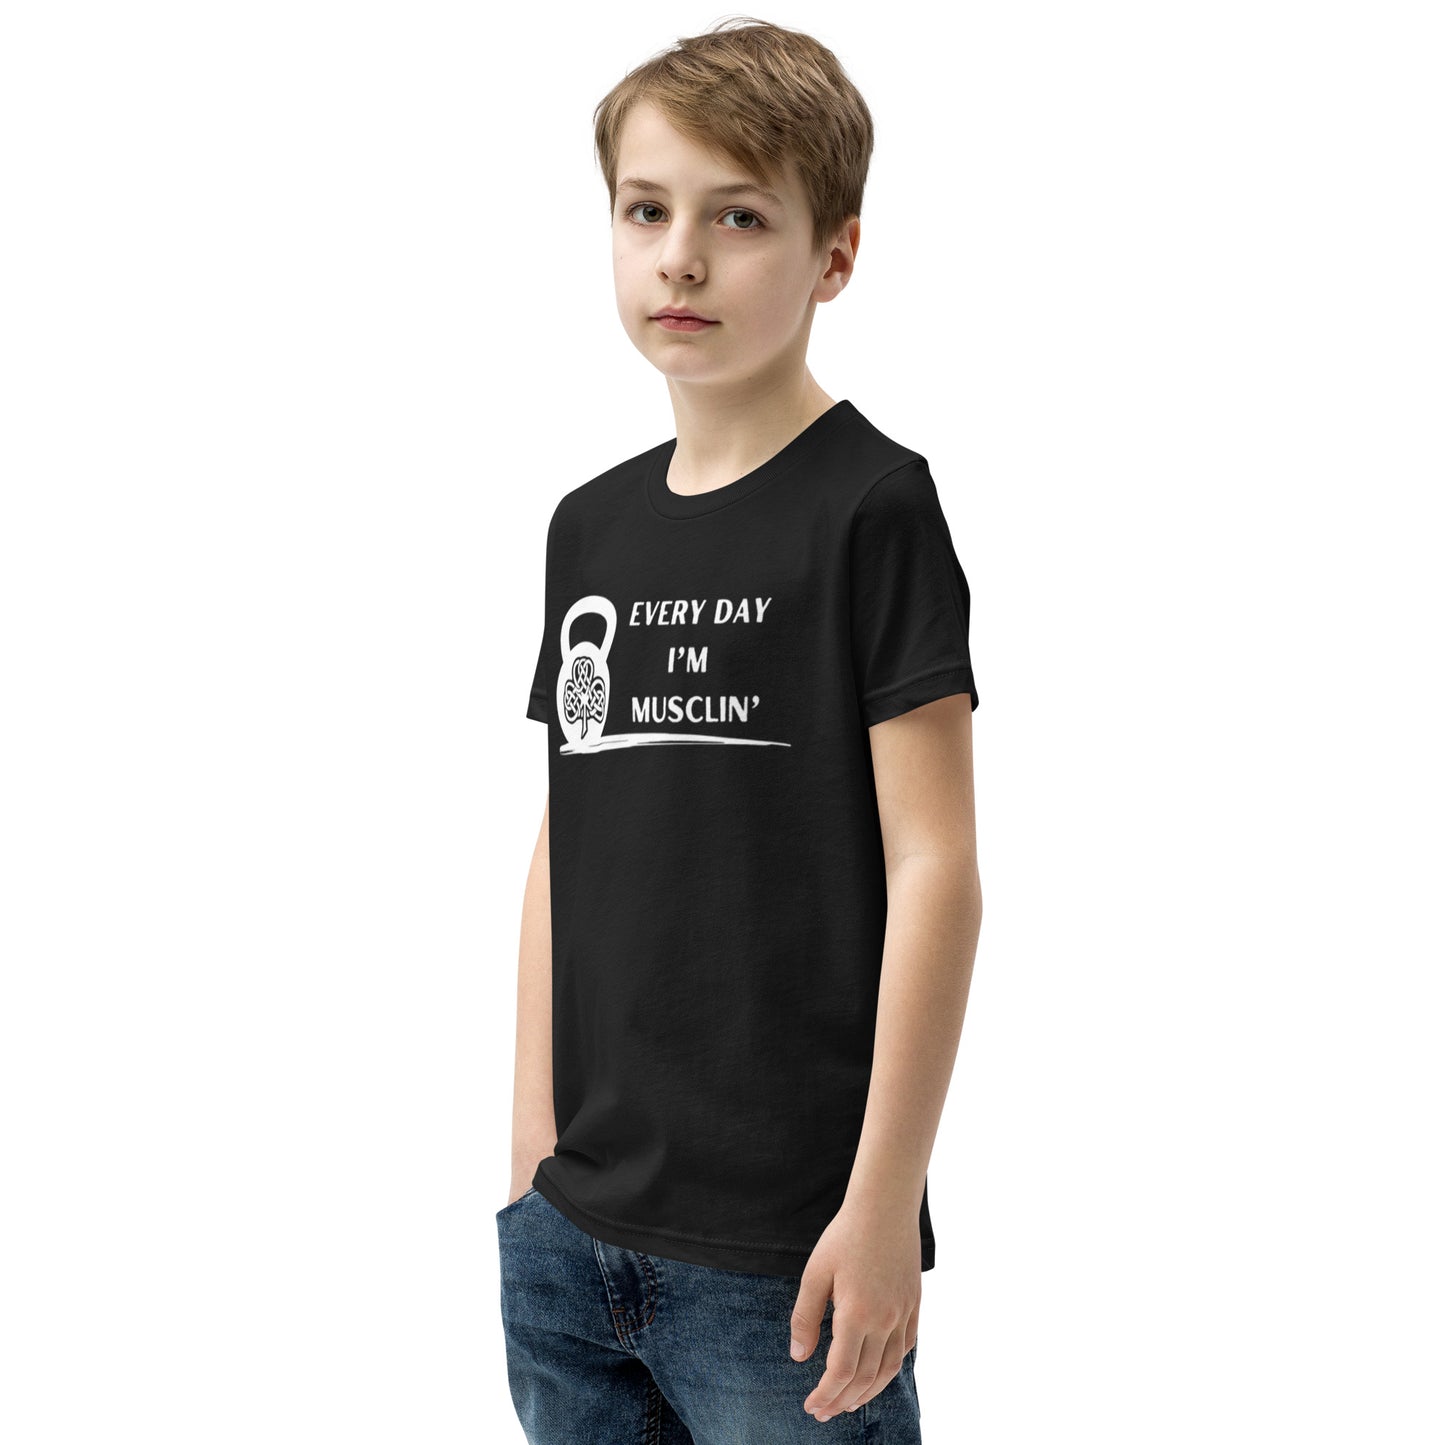 Every Day I'm Musclin' - Unisex Youth Short Sleeve T-Shirt